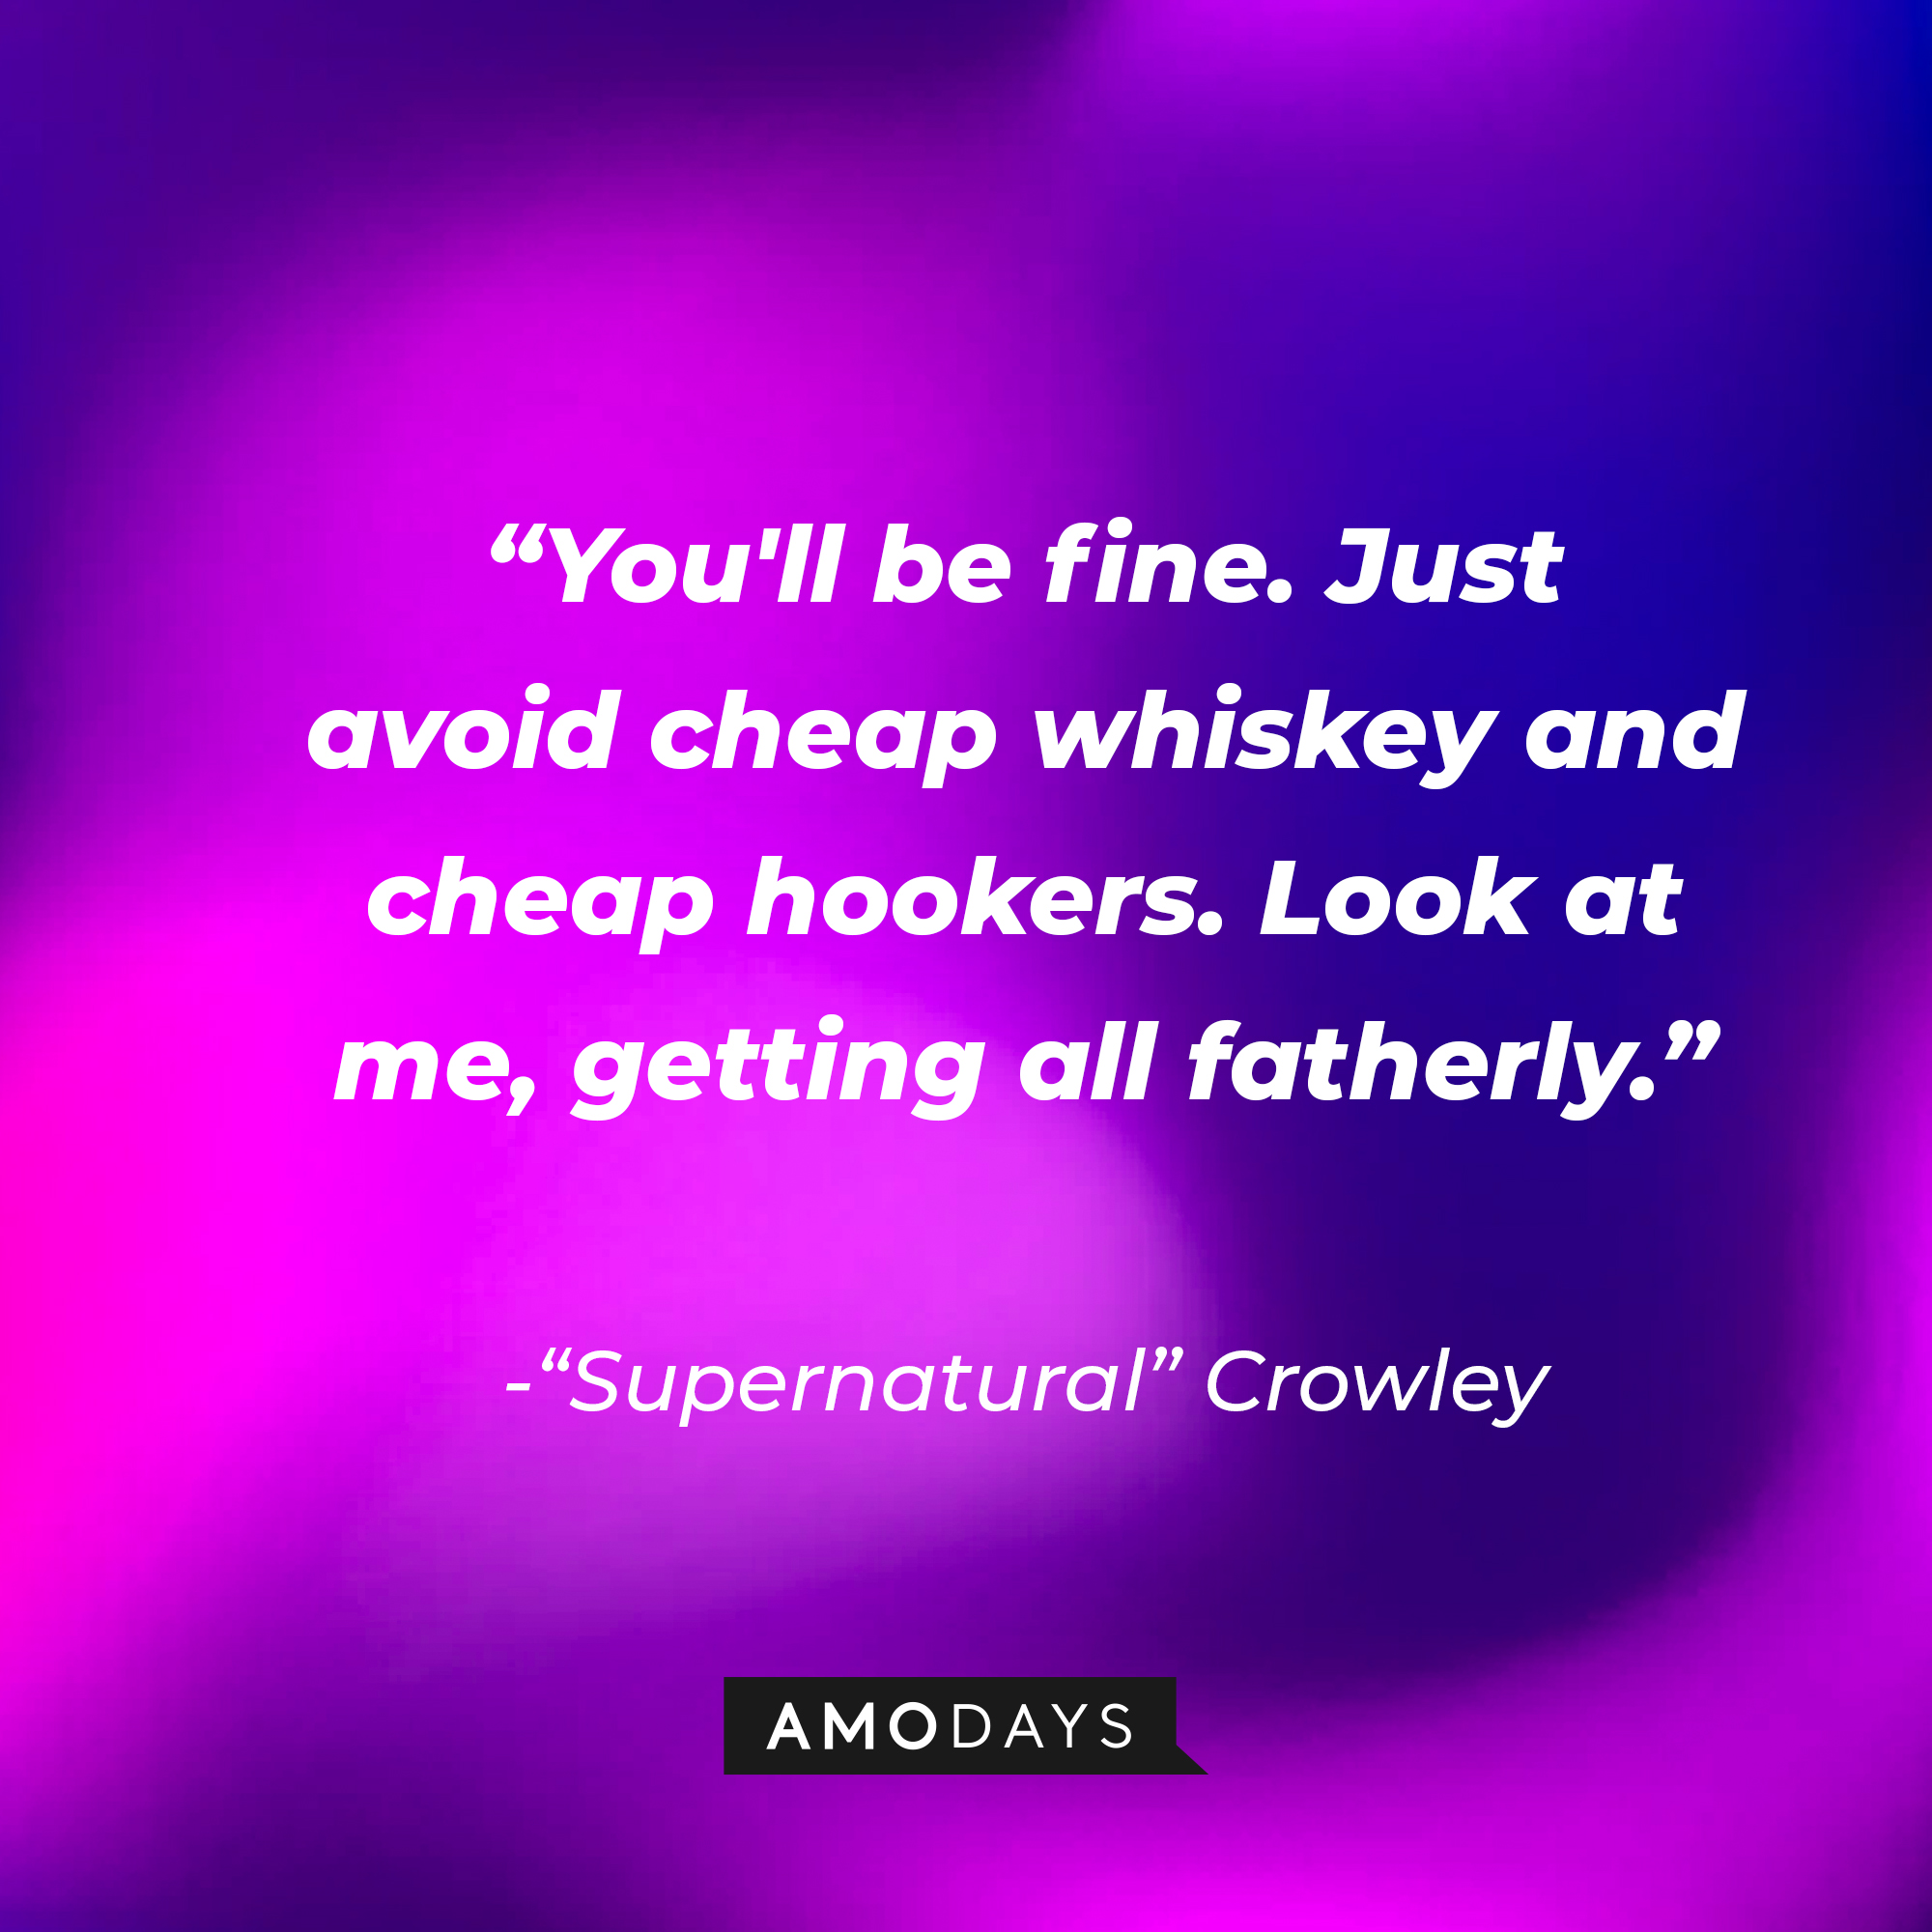 "Supernatural" Crowley's quote: "You'll be fine. Just avoid cheap whiskey and cheap hookers. Look at me, getting all fatherly." | Source: AmoDays